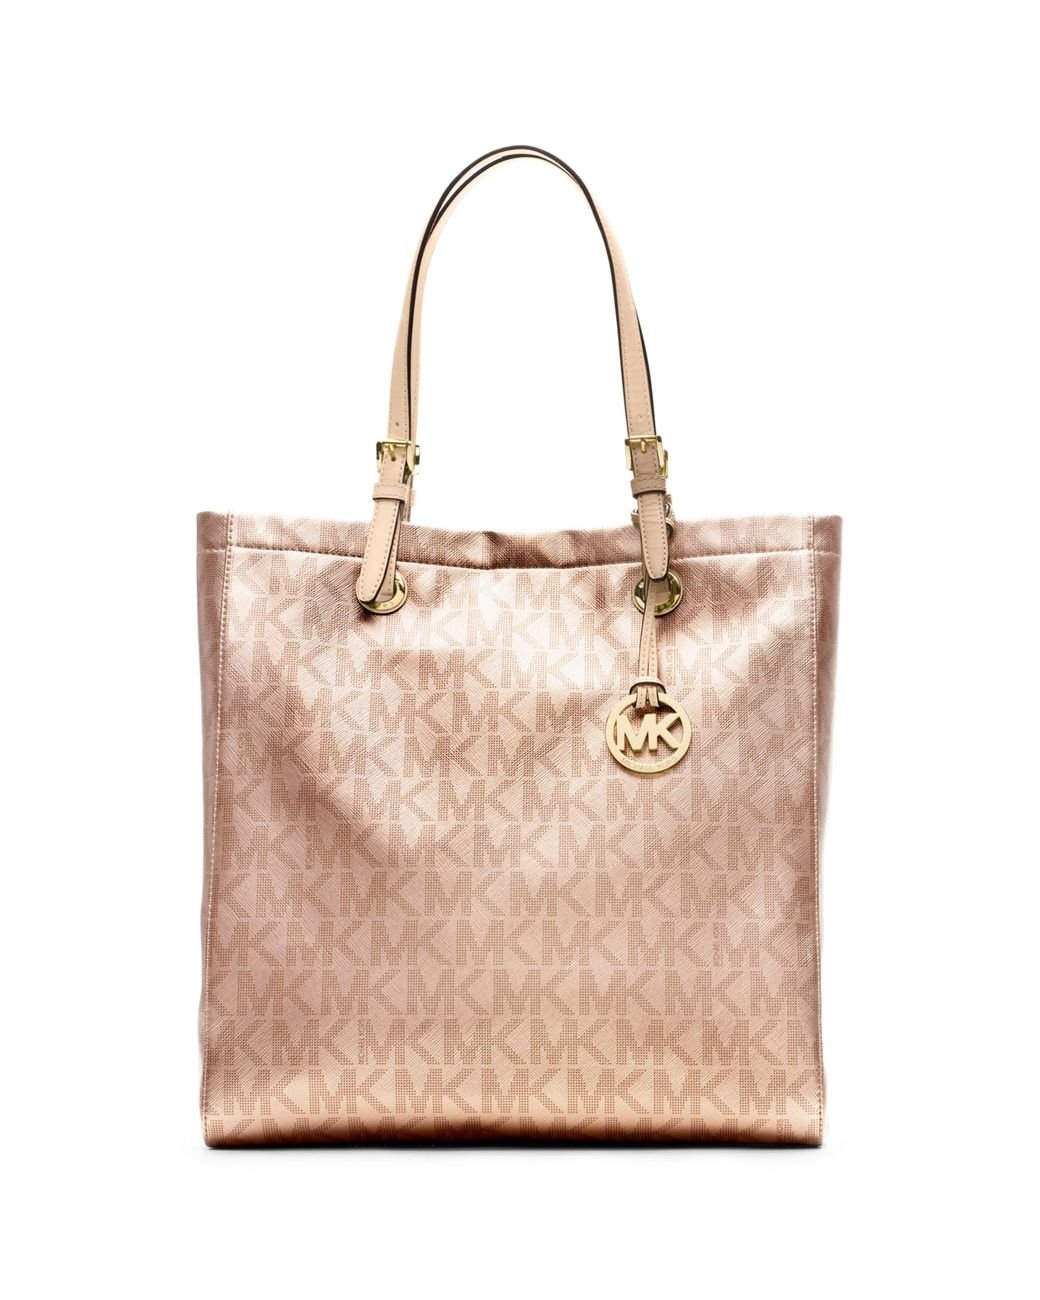 Michael kors kenly large north south tote pvc leather vanilla mk signature  pink